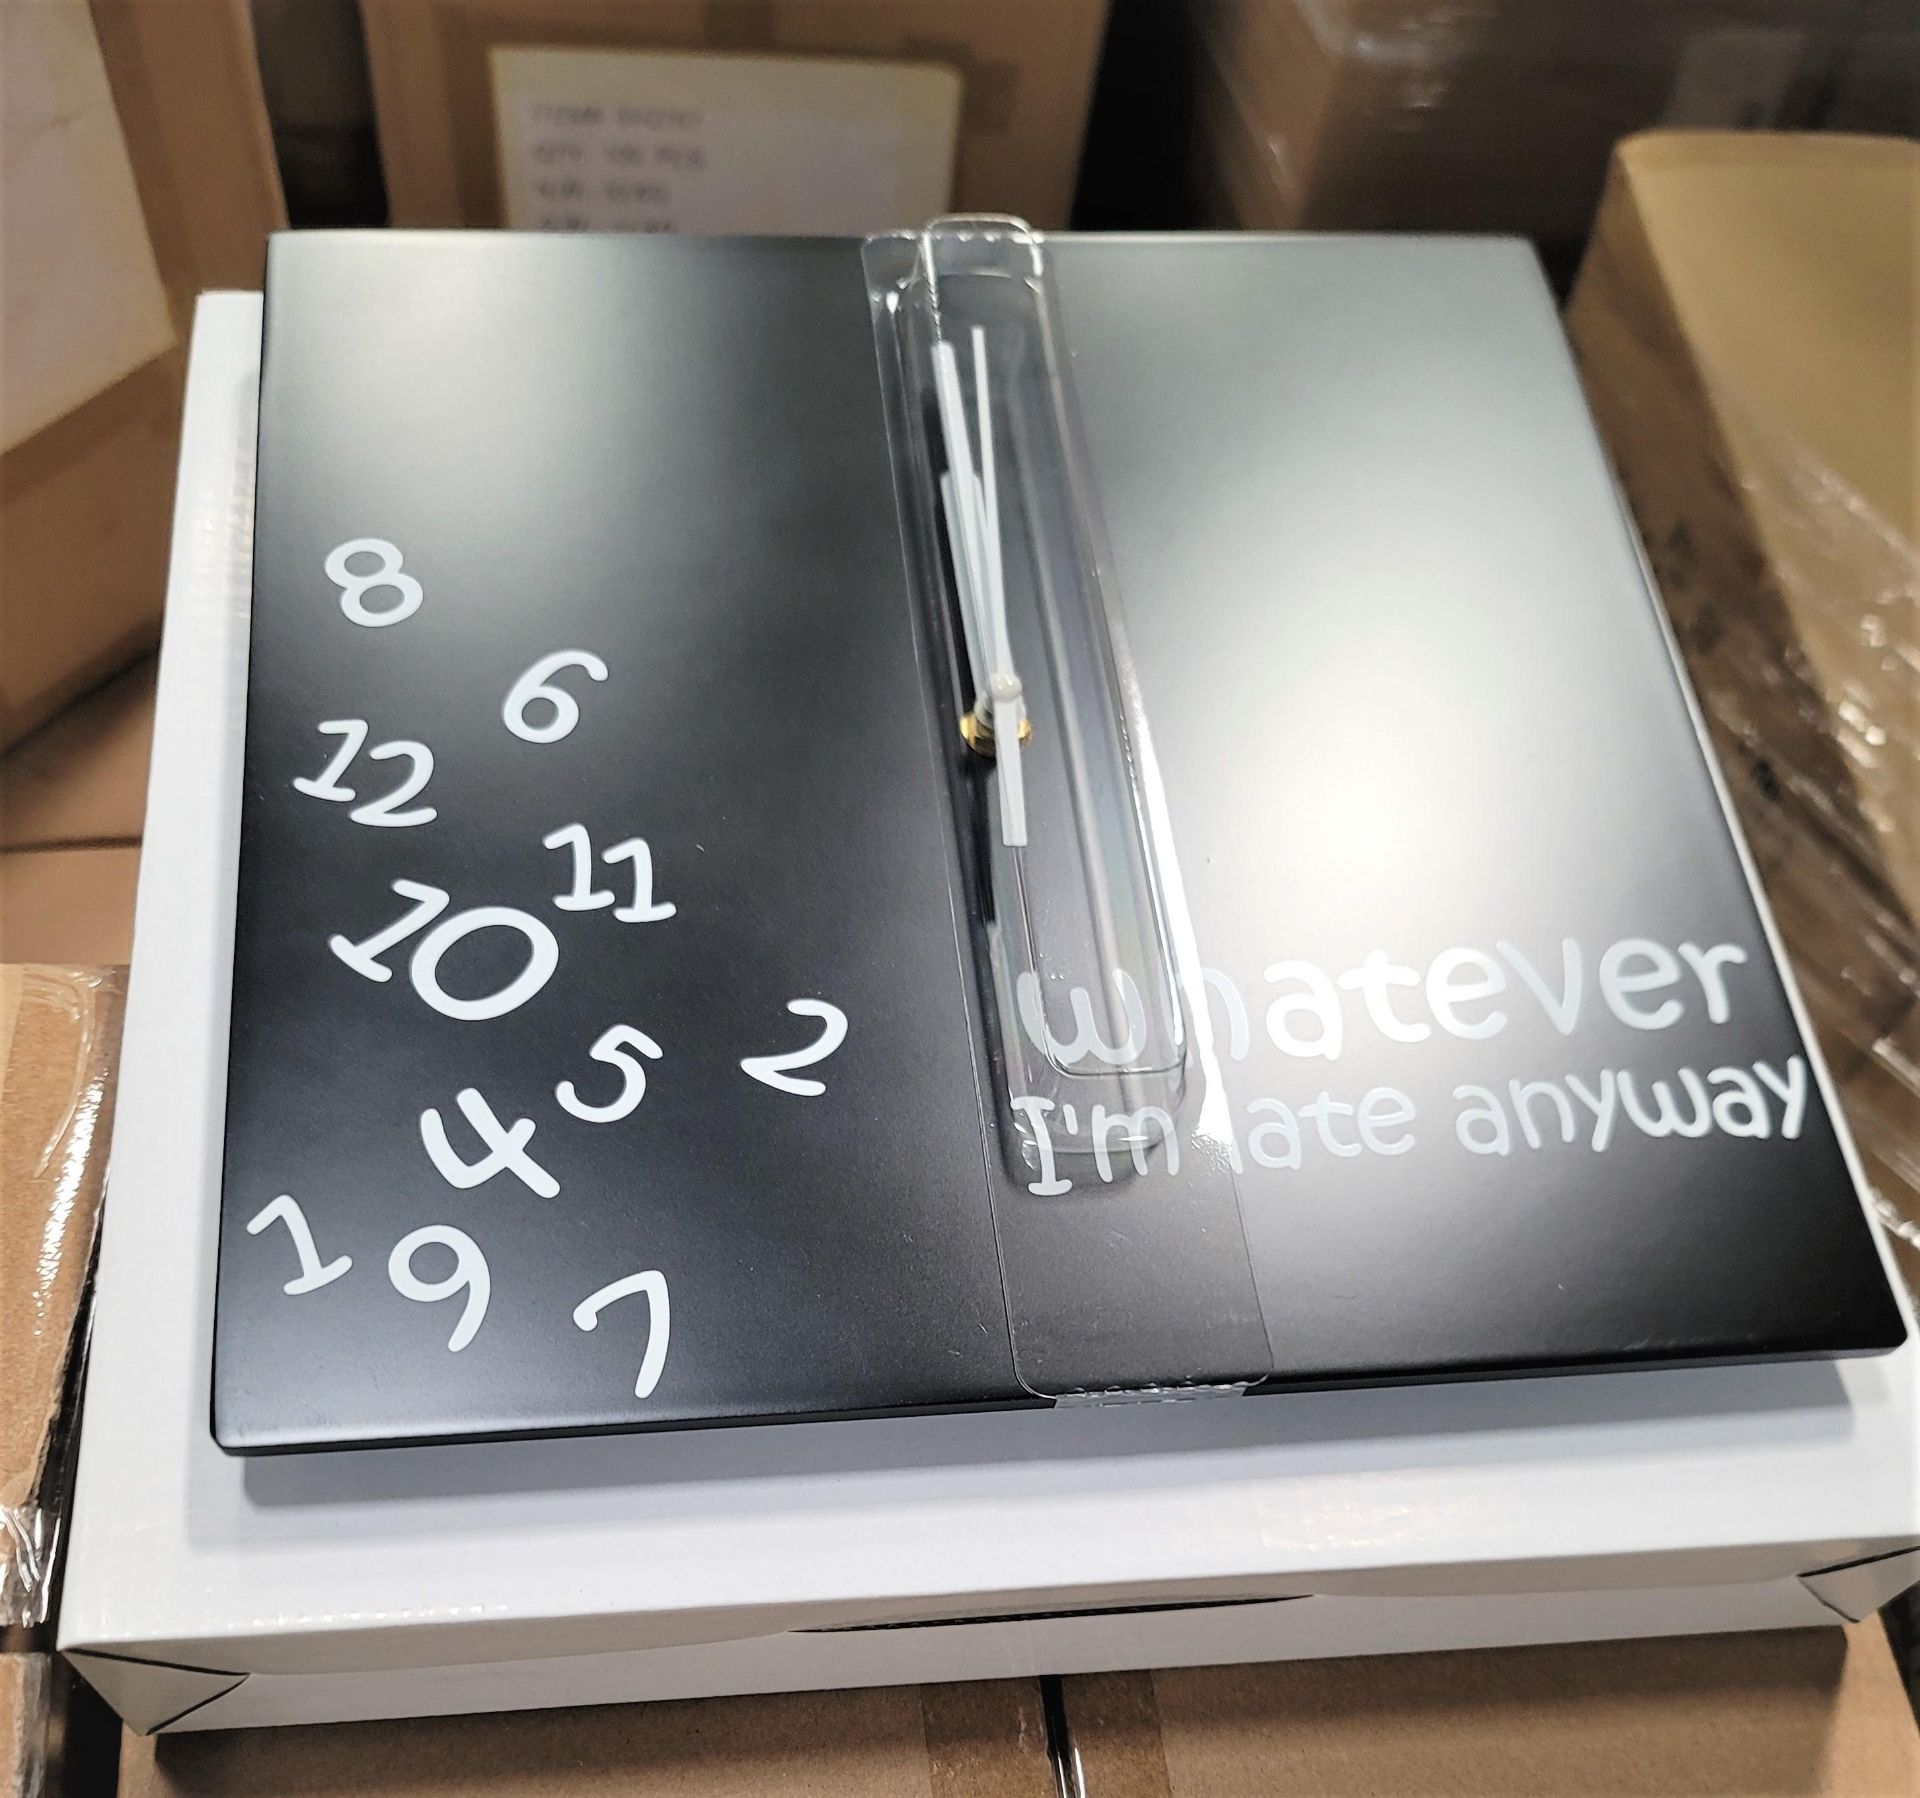 LOT - PALLET OF (70) "WHATEVER I'M LATE ANYWAY" WALL CLOCK, 11-3/4" X 11-3/4", (7 CASES/10 PER